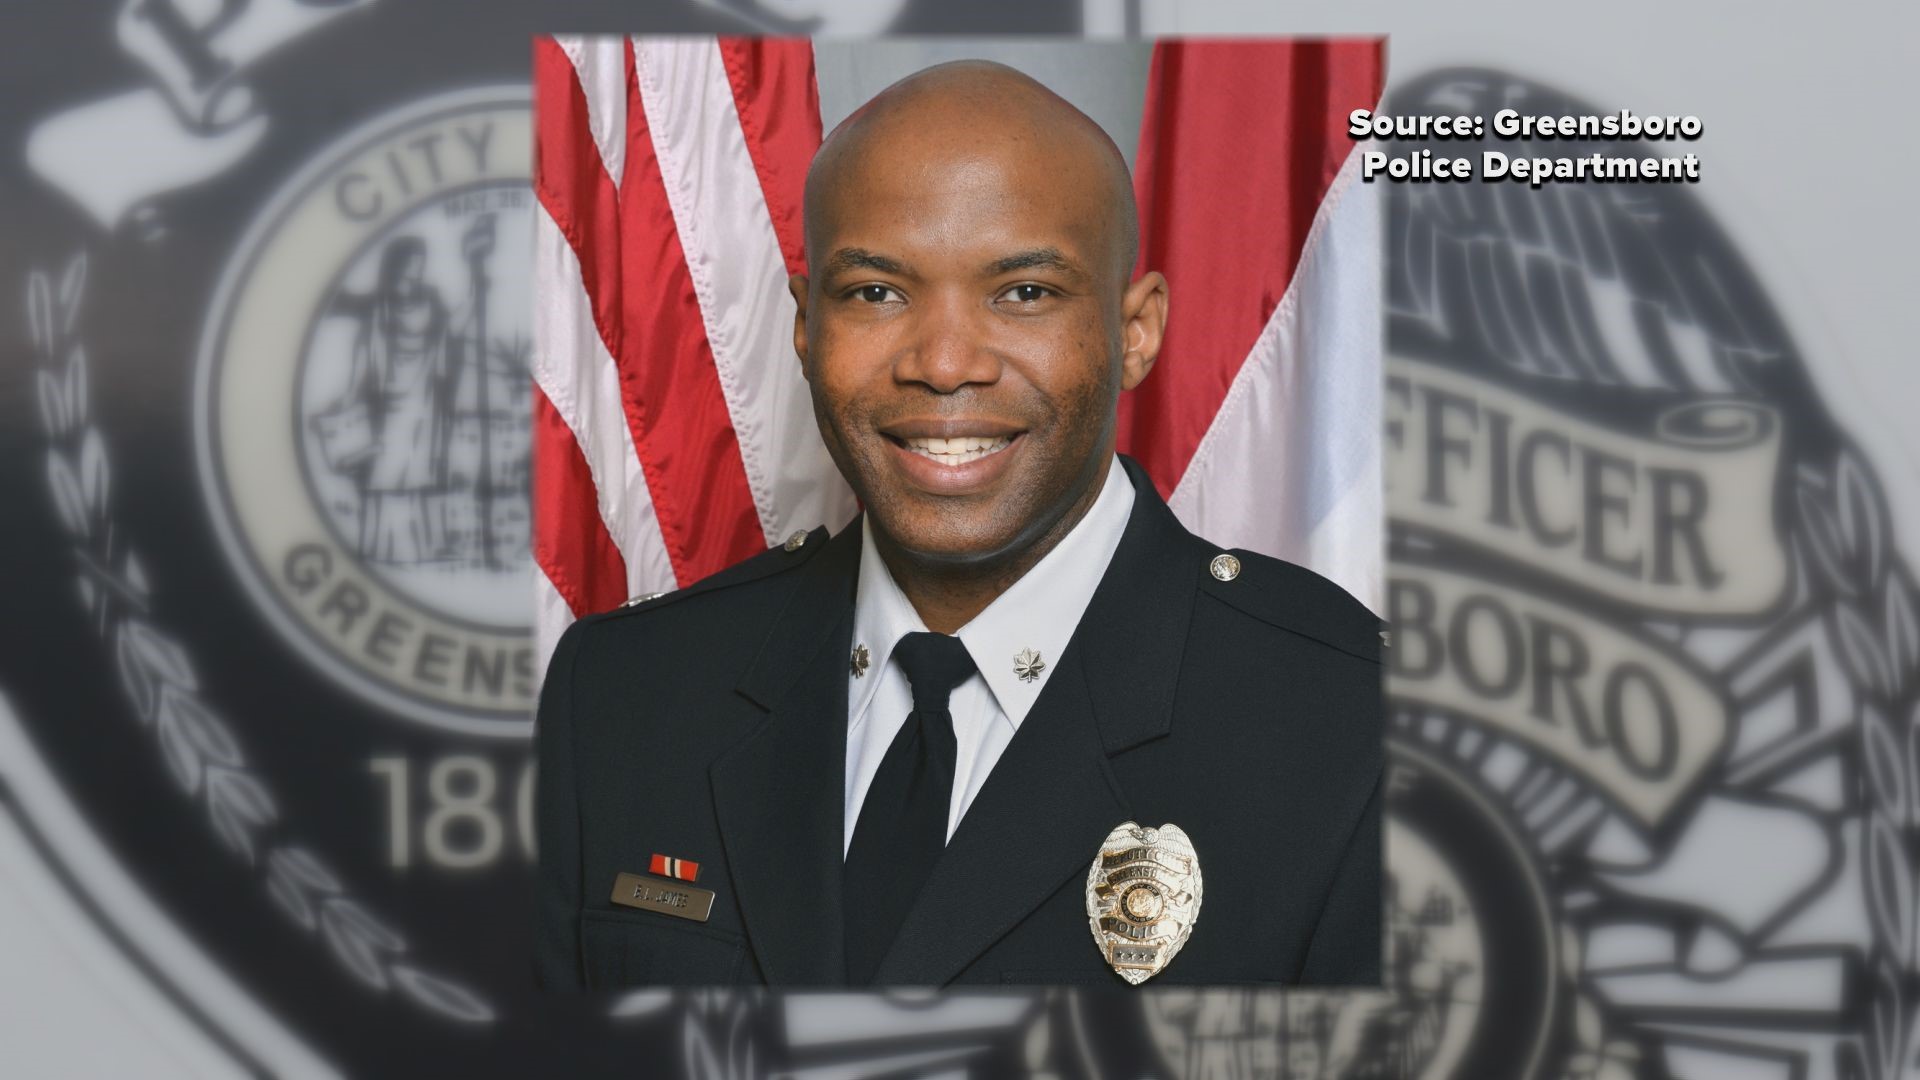 Deputy Chief Brian James will begin his new role as police chief February 1st.